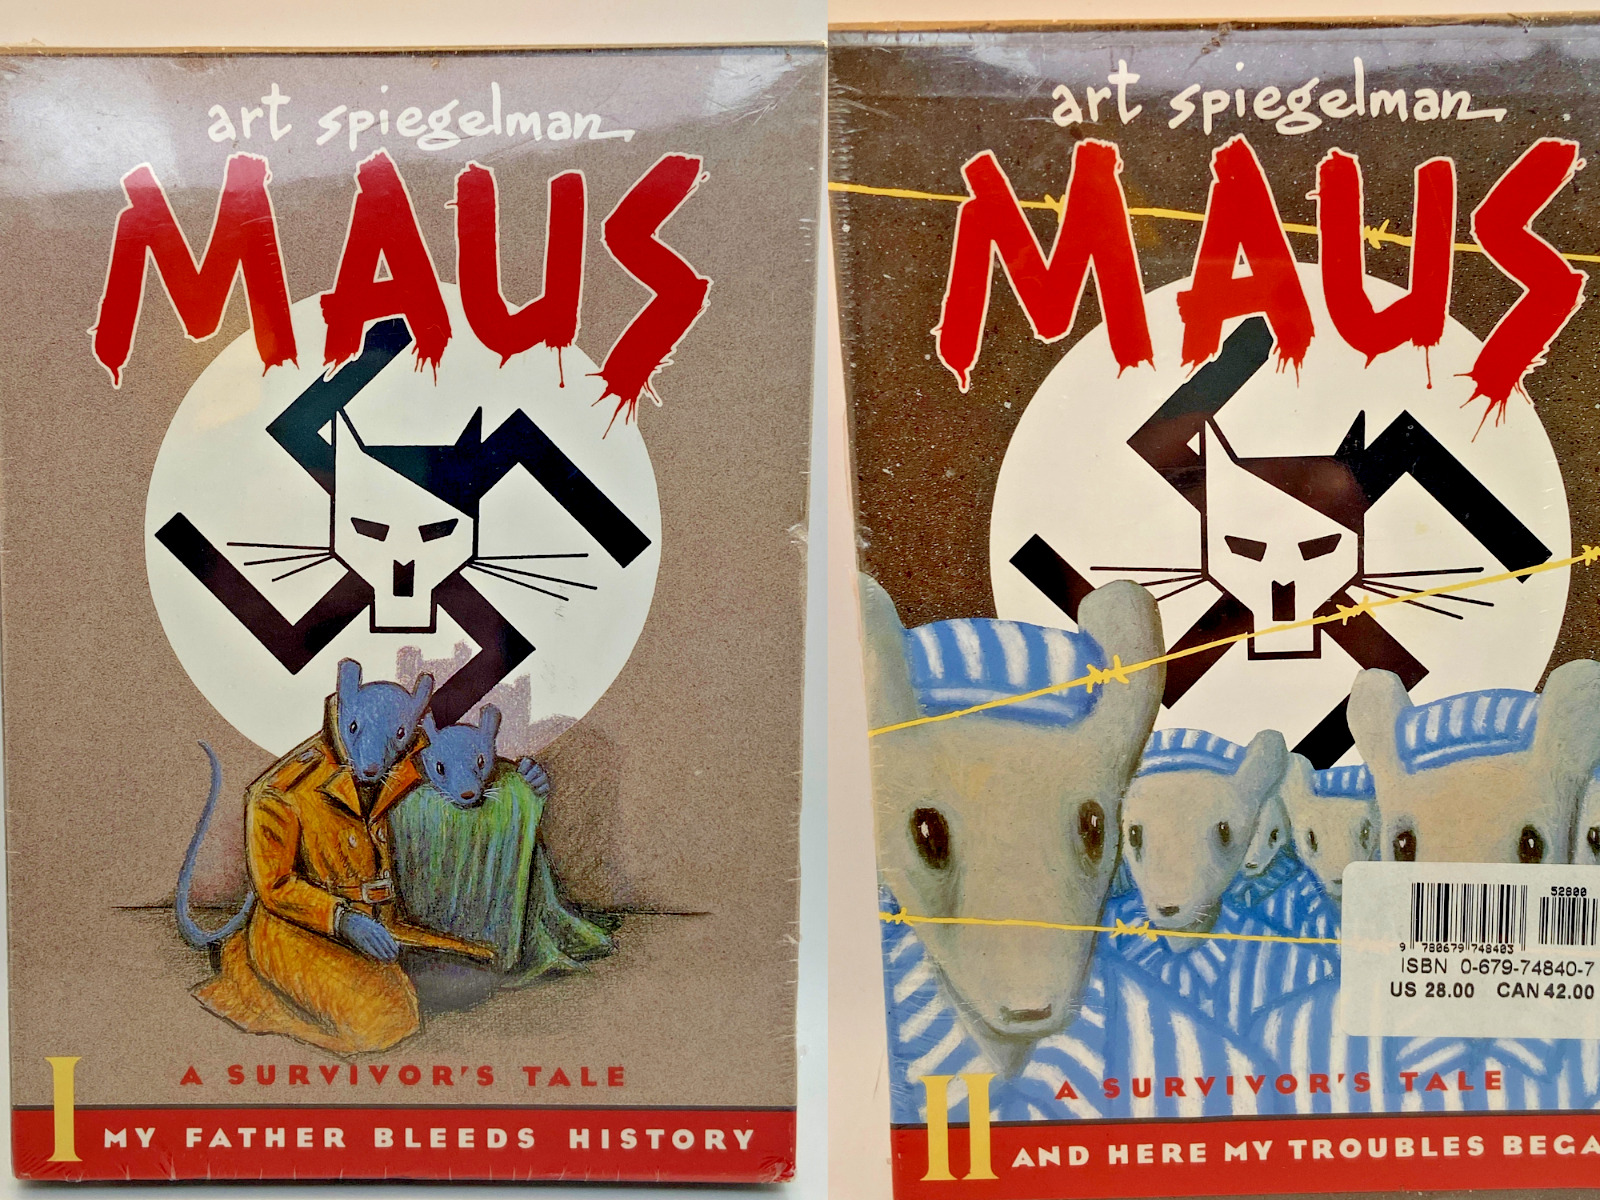 Maus, vol 1 and 2 COMBO PACK Art Spiegelman - Graphic Novel - New and Sealed